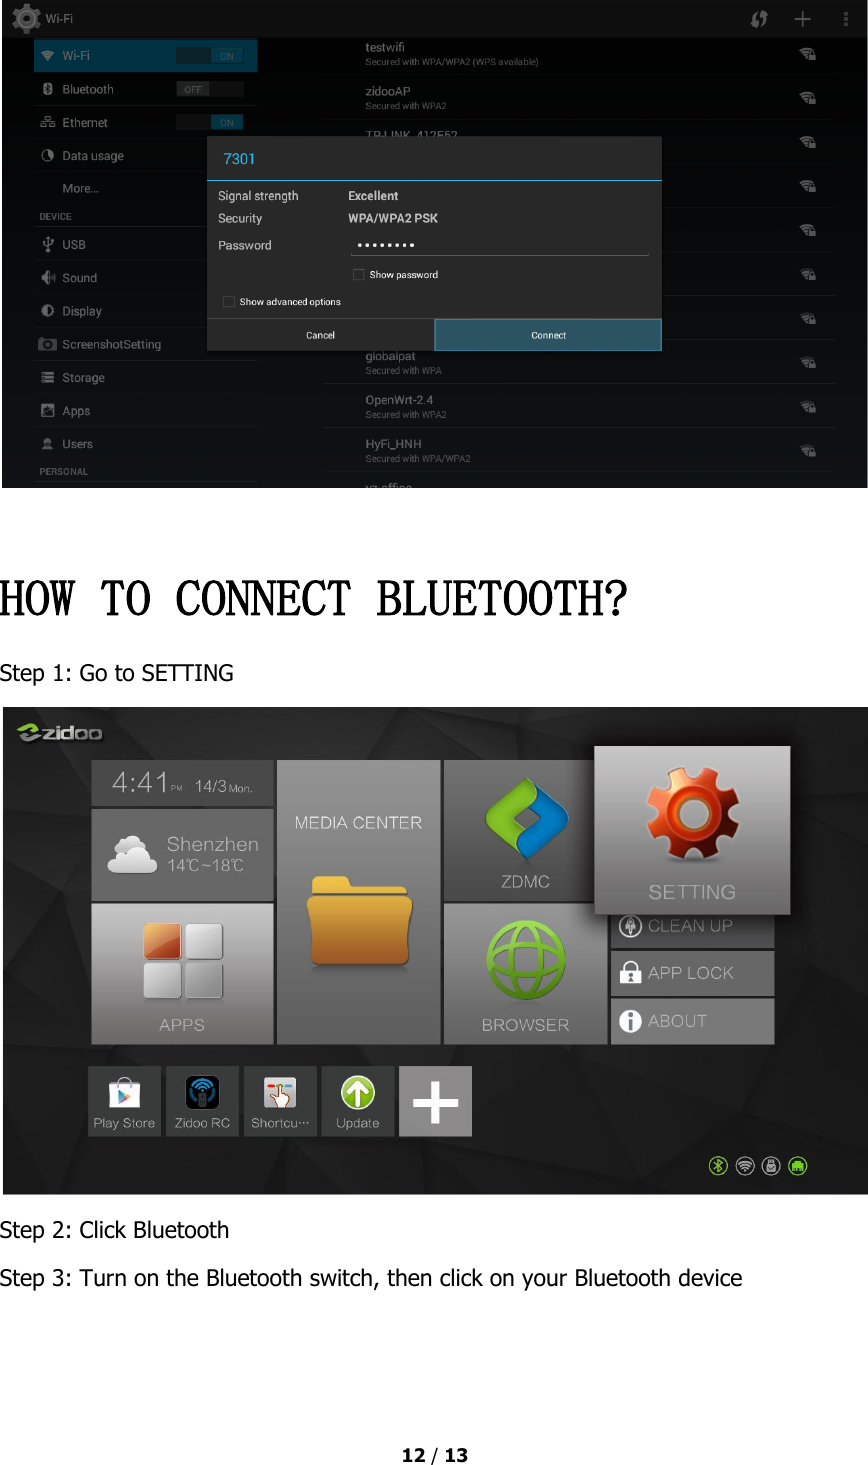  12 / 13    HOW TO CONNECT BLUETOOTH? Step 1: Go to SETTING  Step 2: Click Bluetooth Step 3: Turn on the Bluetooth switch, then click on your Bluetooth device 